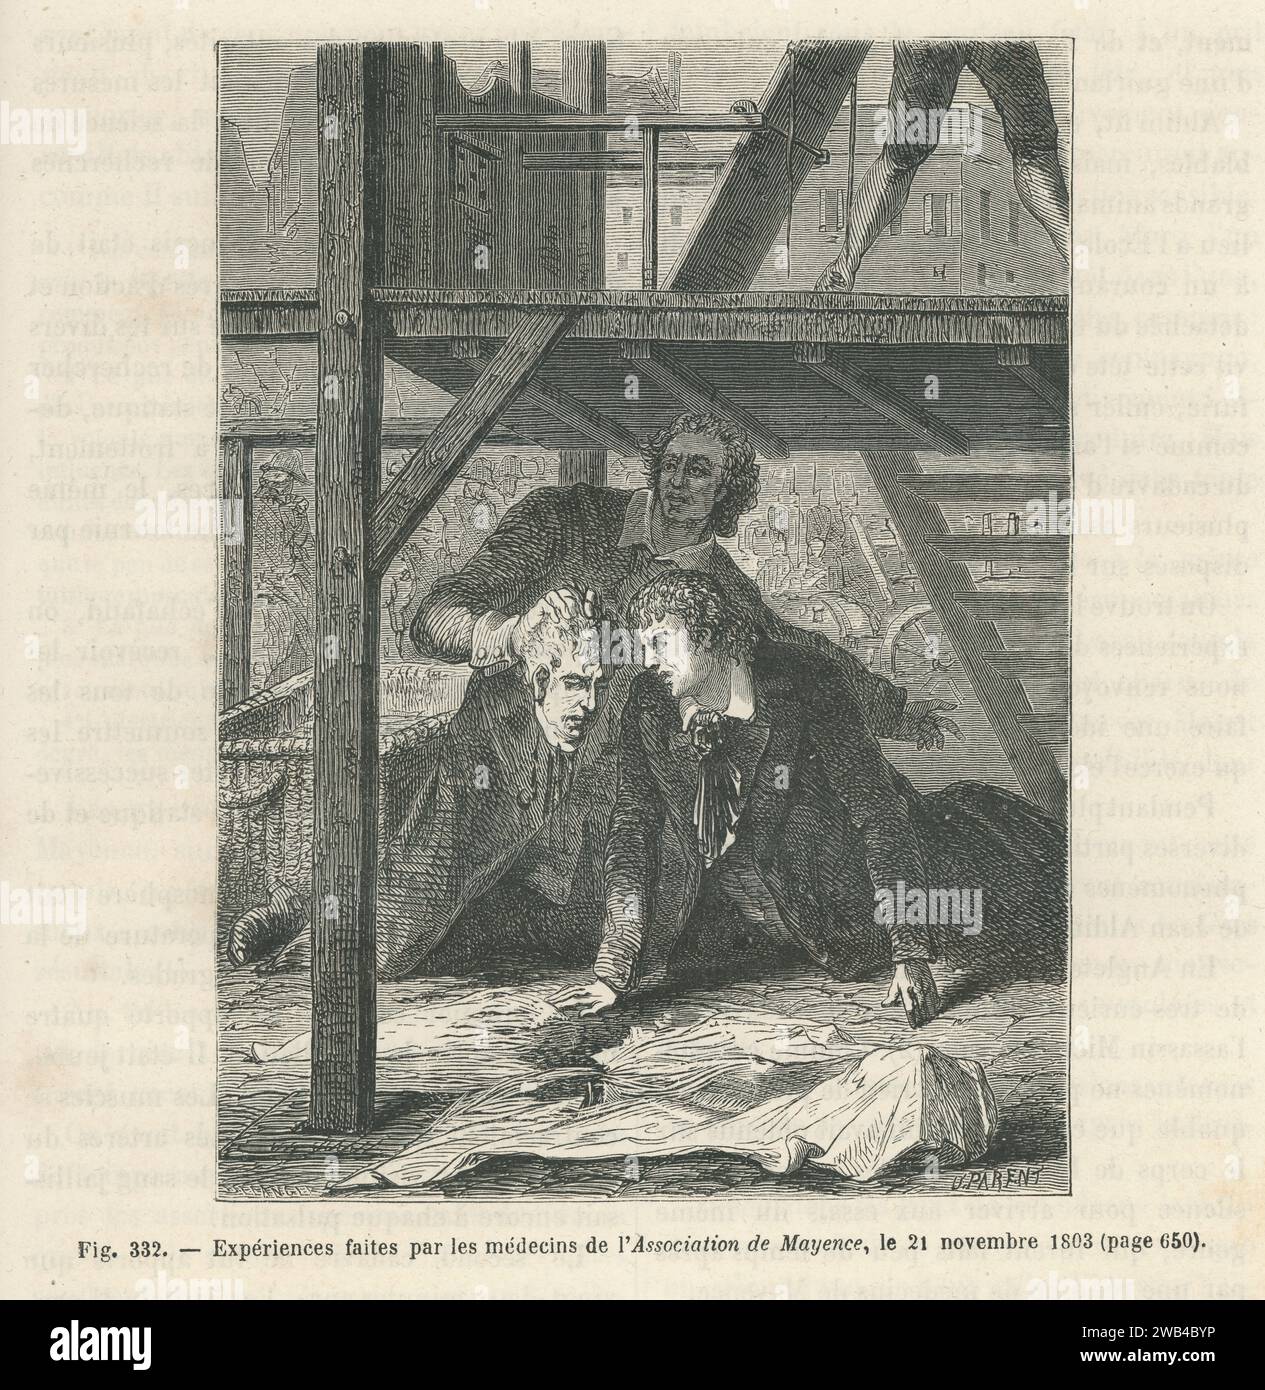 Experiment on the persistence of pain after death: doctors from the Mainz Association placed under a scaffold watching for the slightest facial contraction after decapitation.  Illustration from 'Les Merveilles de la science ou description populaire des inventions modernes' written by Louis Figuier and published in 1867 by Furne, Jouvet et Cie. Stock Photo